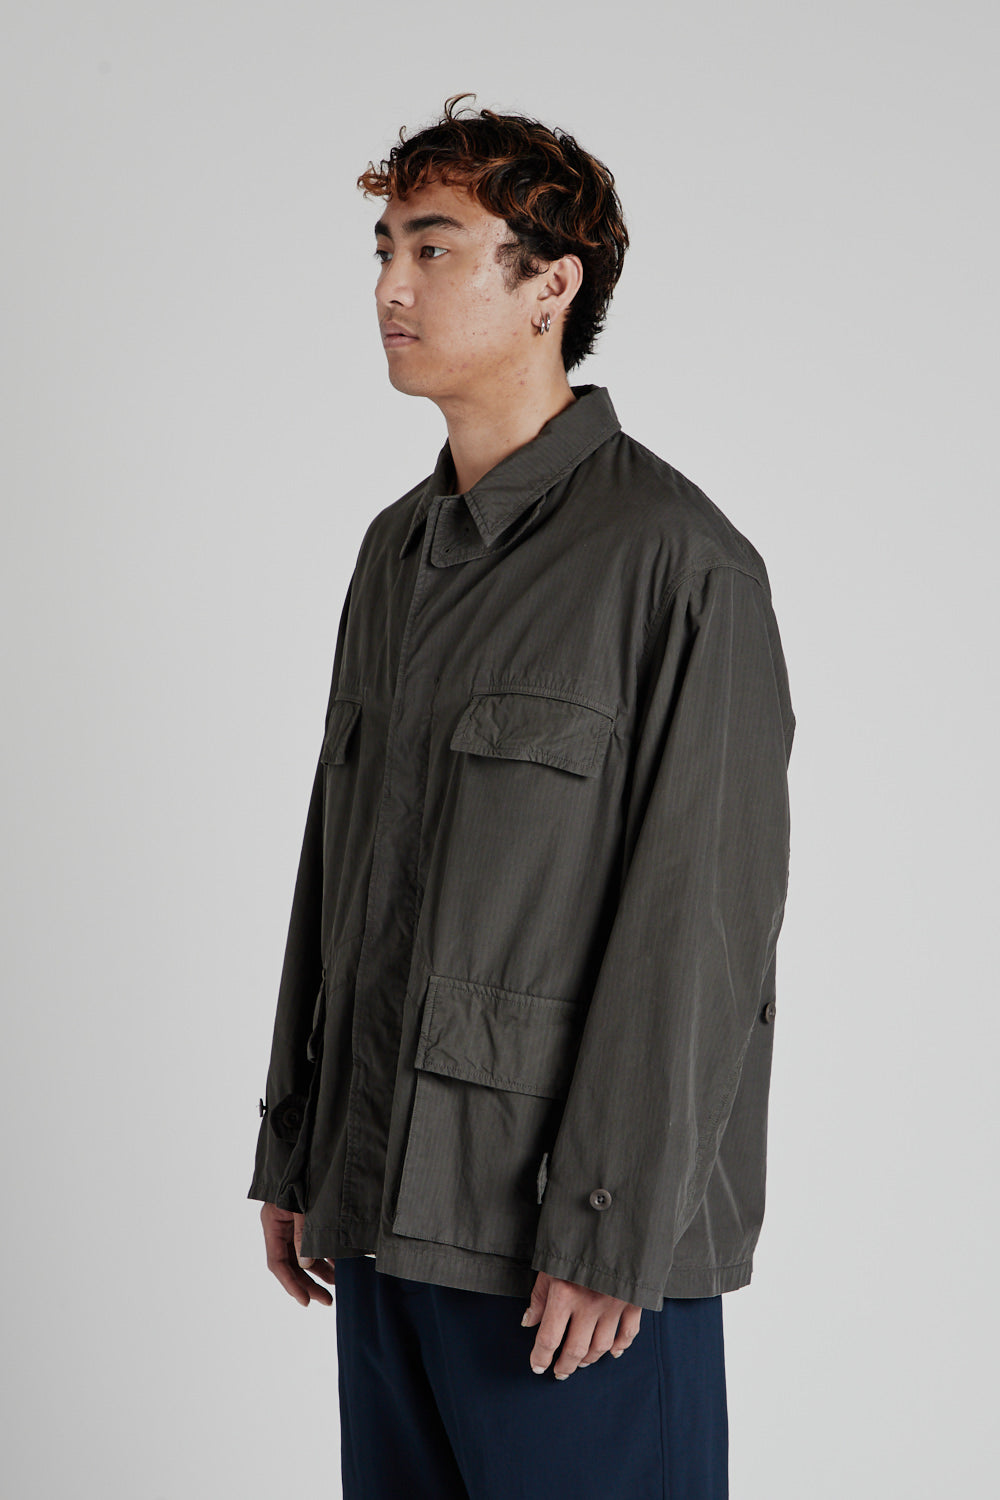 43 French Military Jacket - Ink Black